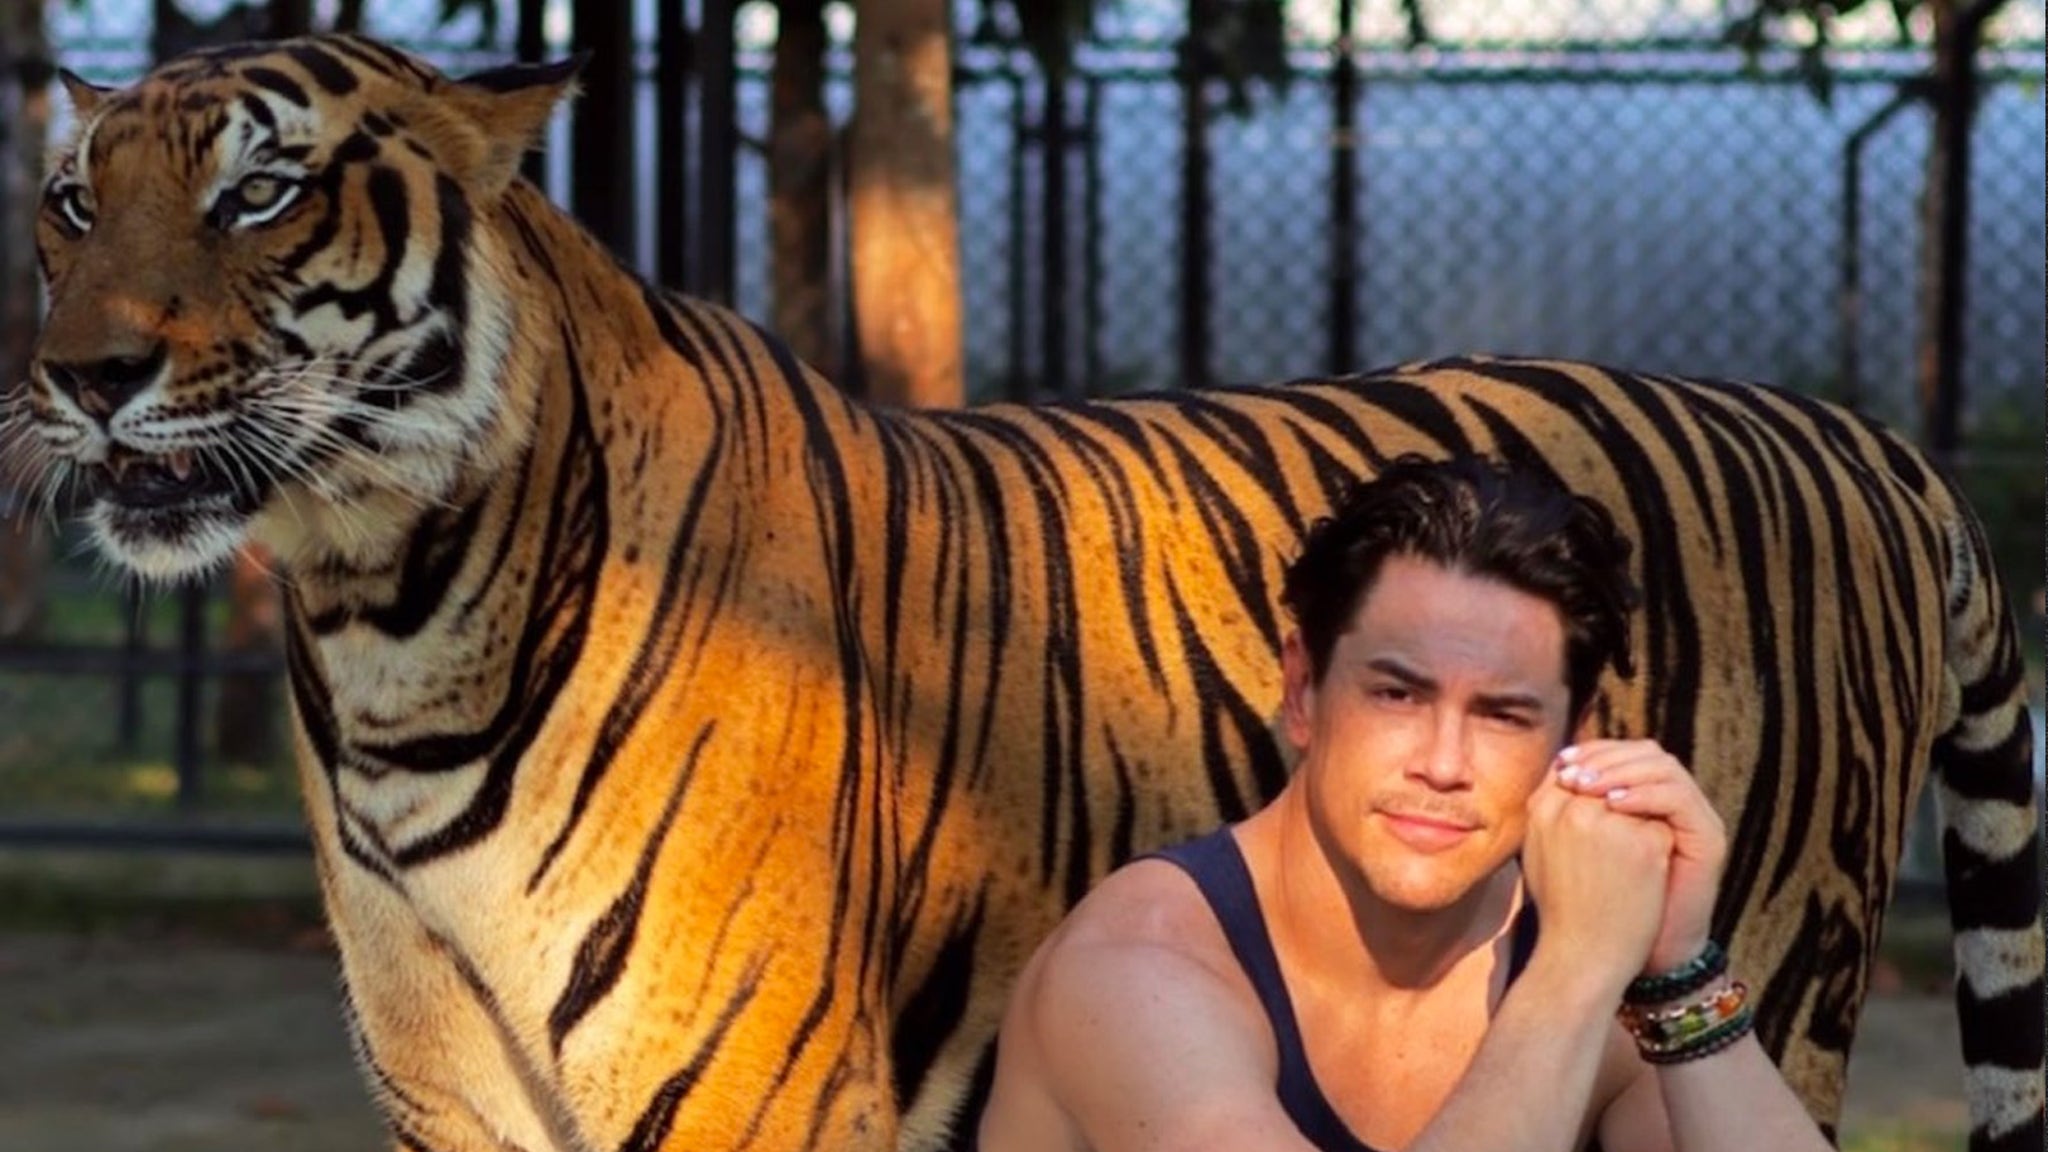 Shameful' Tom Sandoval Blasted For Visiting Tiger Zoo, Accused of Supporting  Animal Cruelty